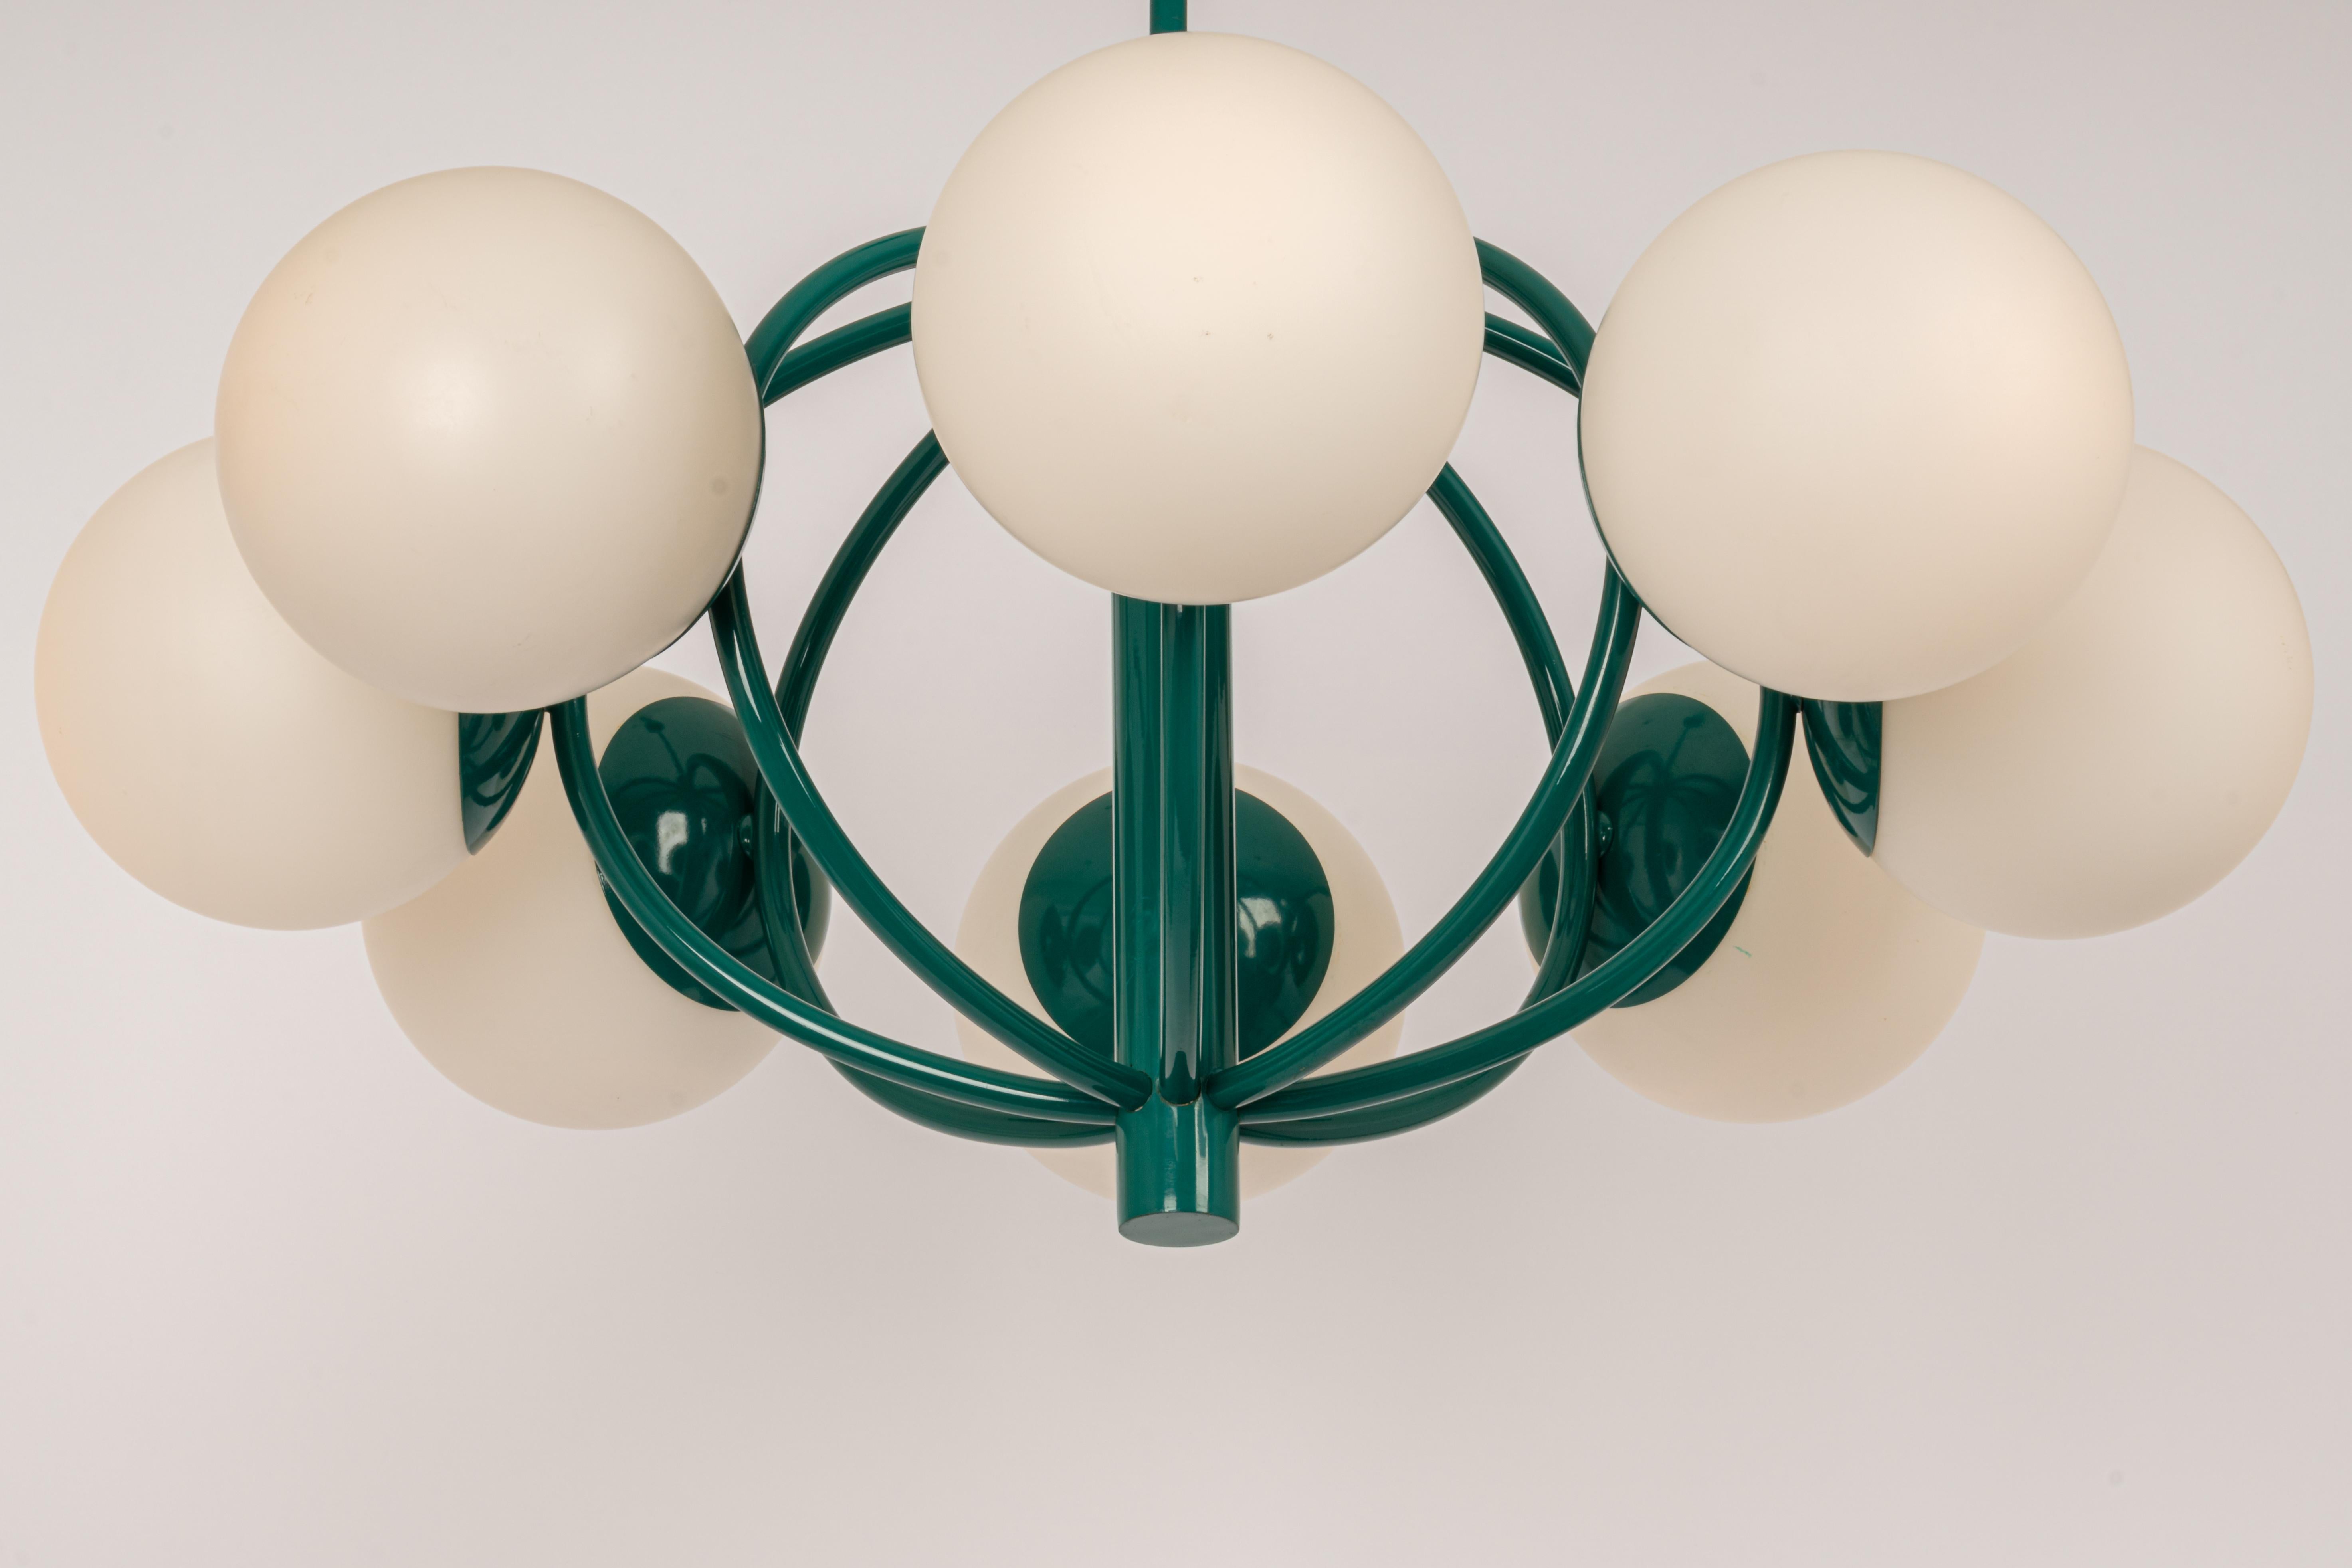 Midcentury vintage pendant in green color made by Kaiser Leuchten, Germany with 8 opal glass balls.
High quality and in very good condition. Cleaned, well-wired and ready to use. 

The fixture requires 8 x E14 small bulbs with 40W max